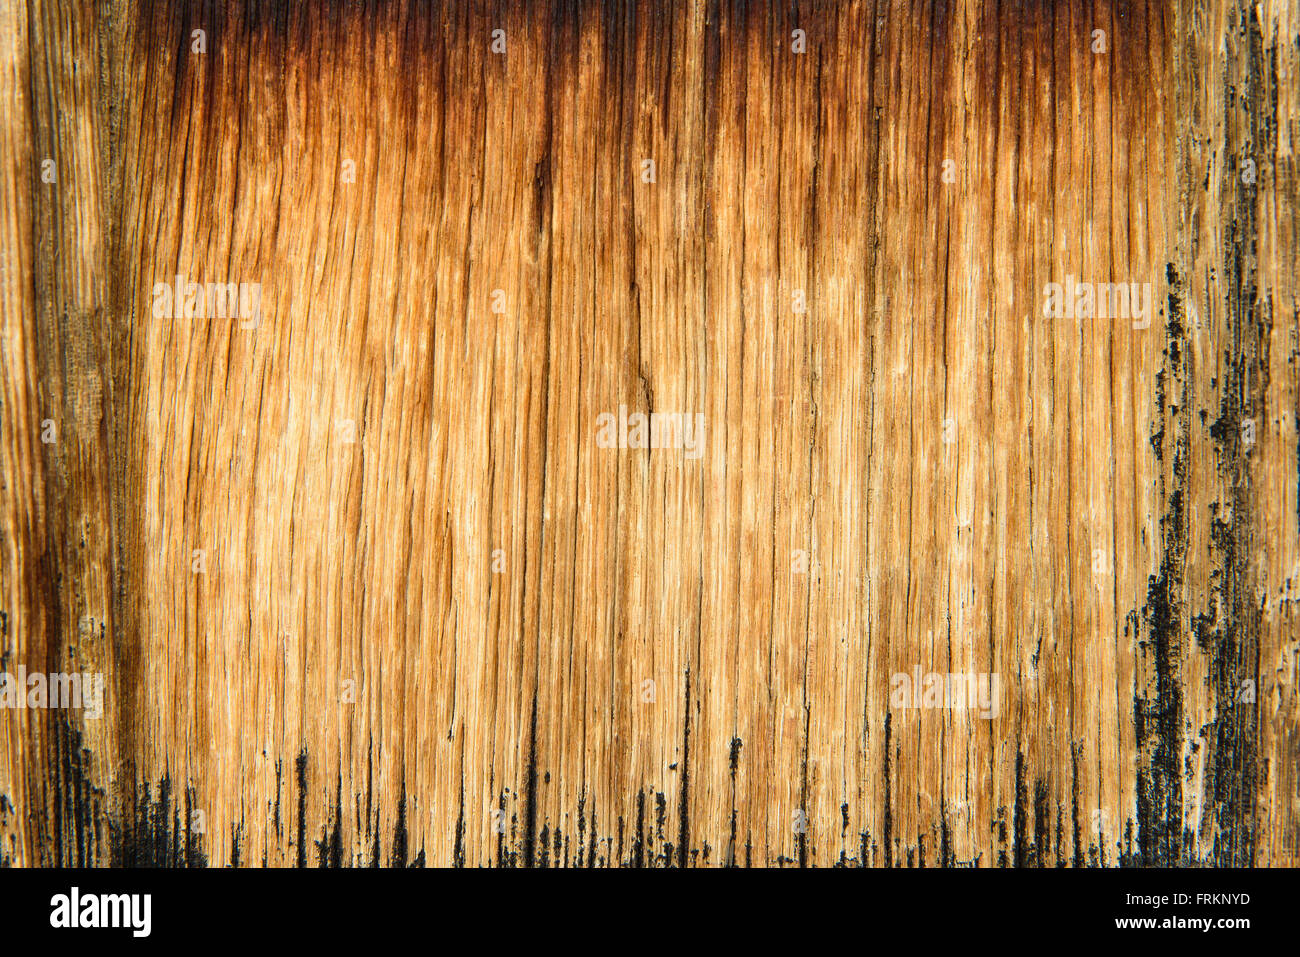 Old wood background with vertical striped Stock Photo